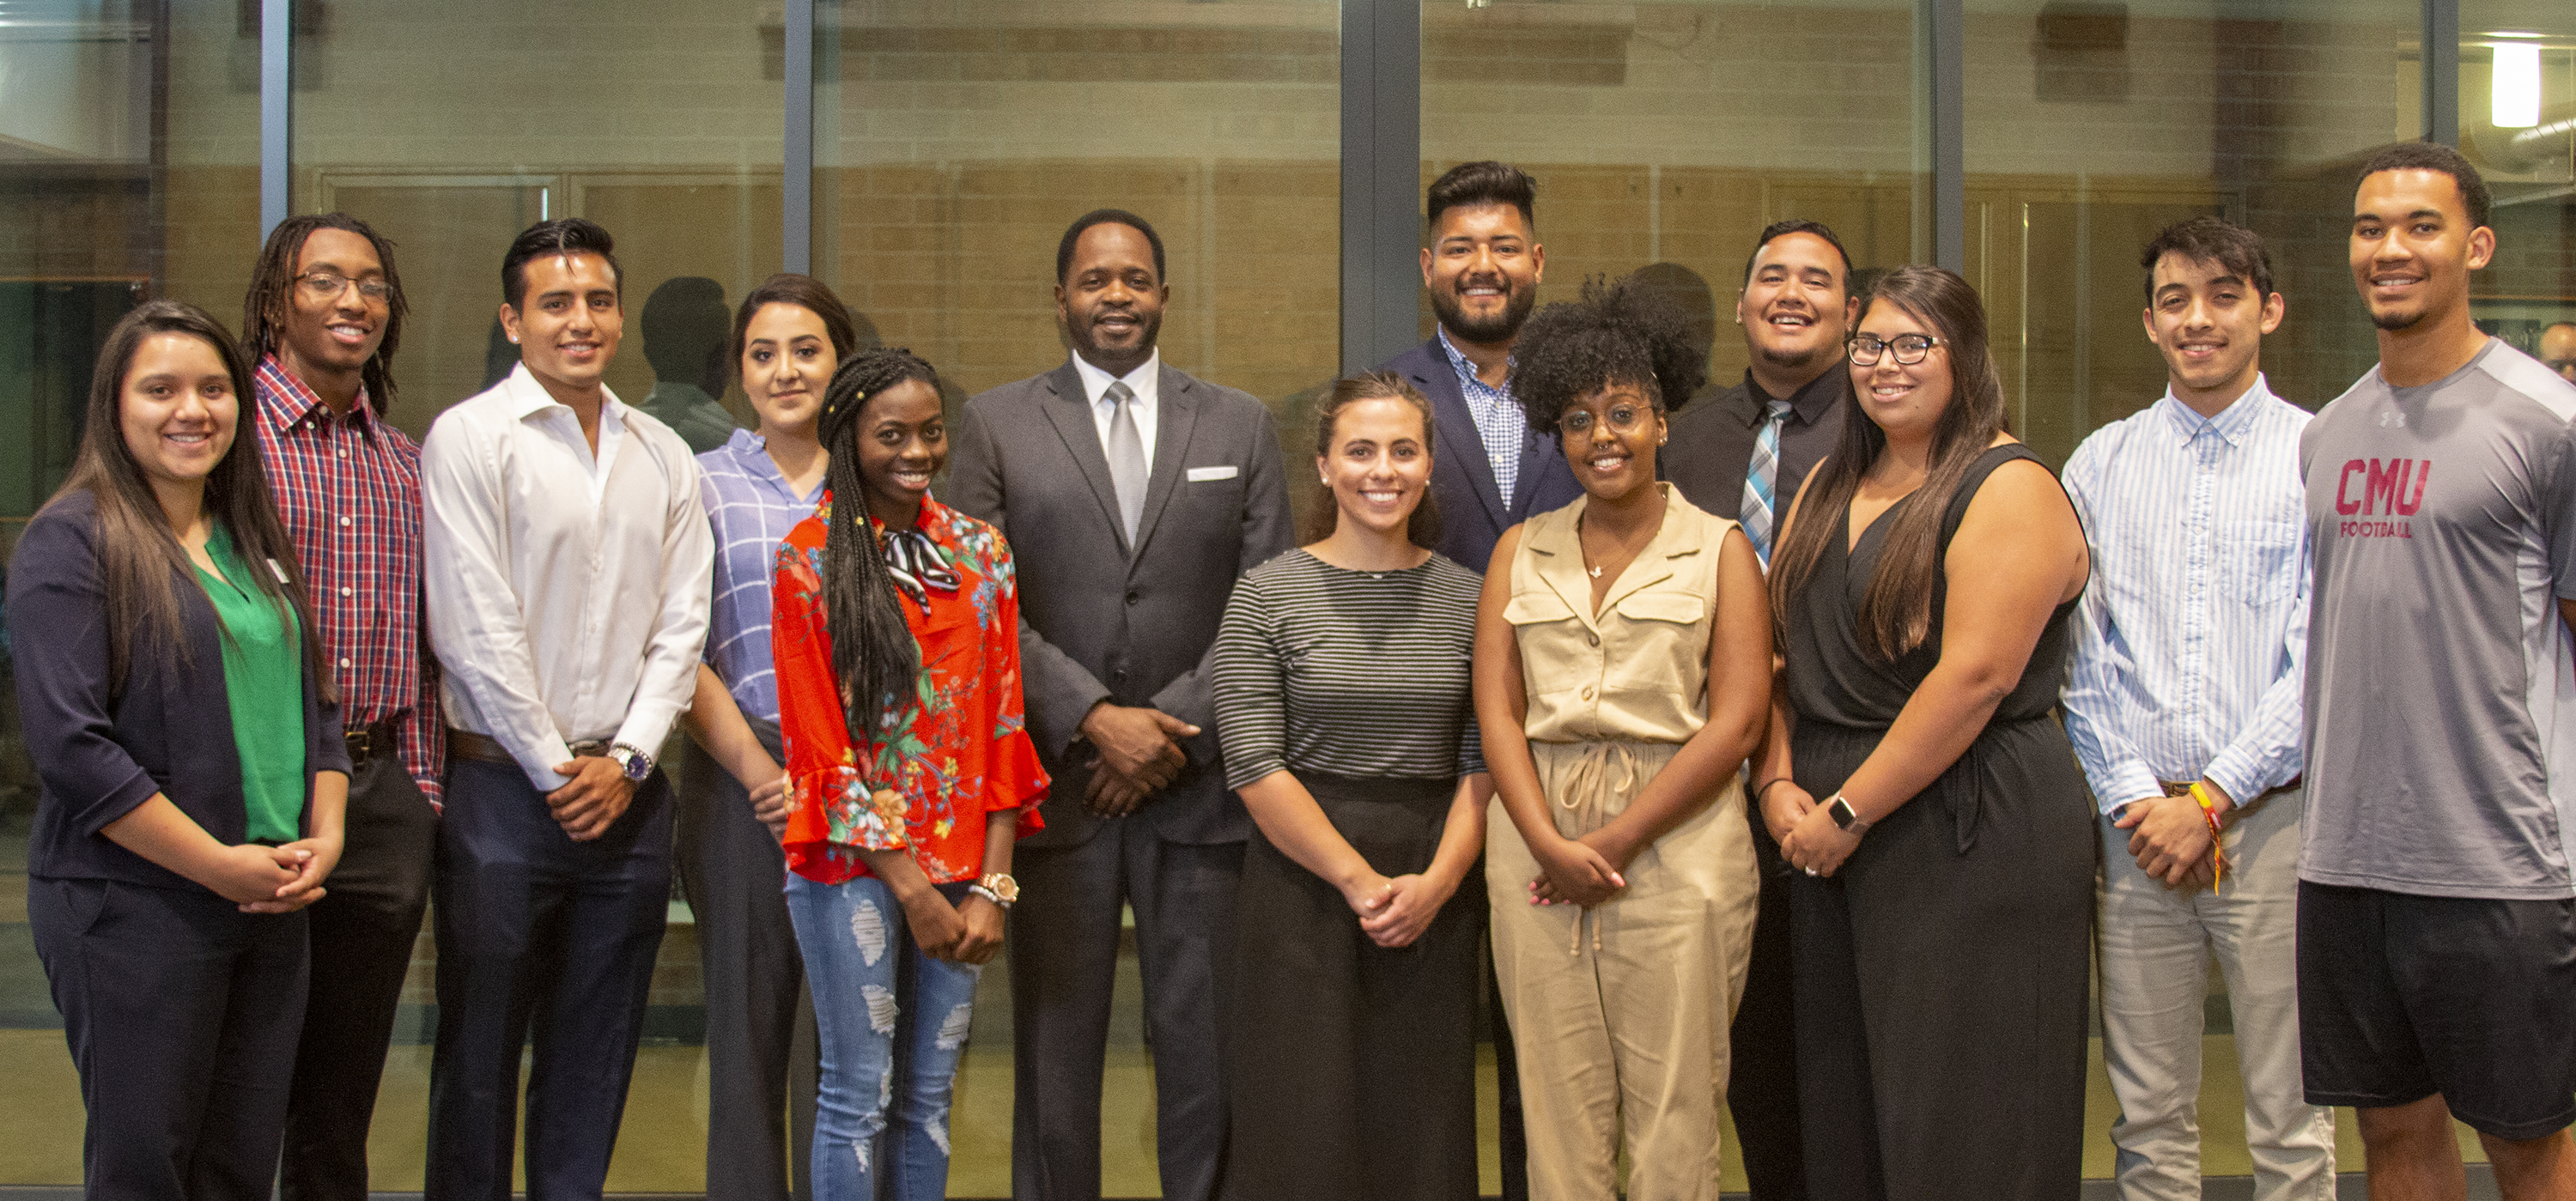 Stephon Ferguson met with students prior to The Dream Lives event